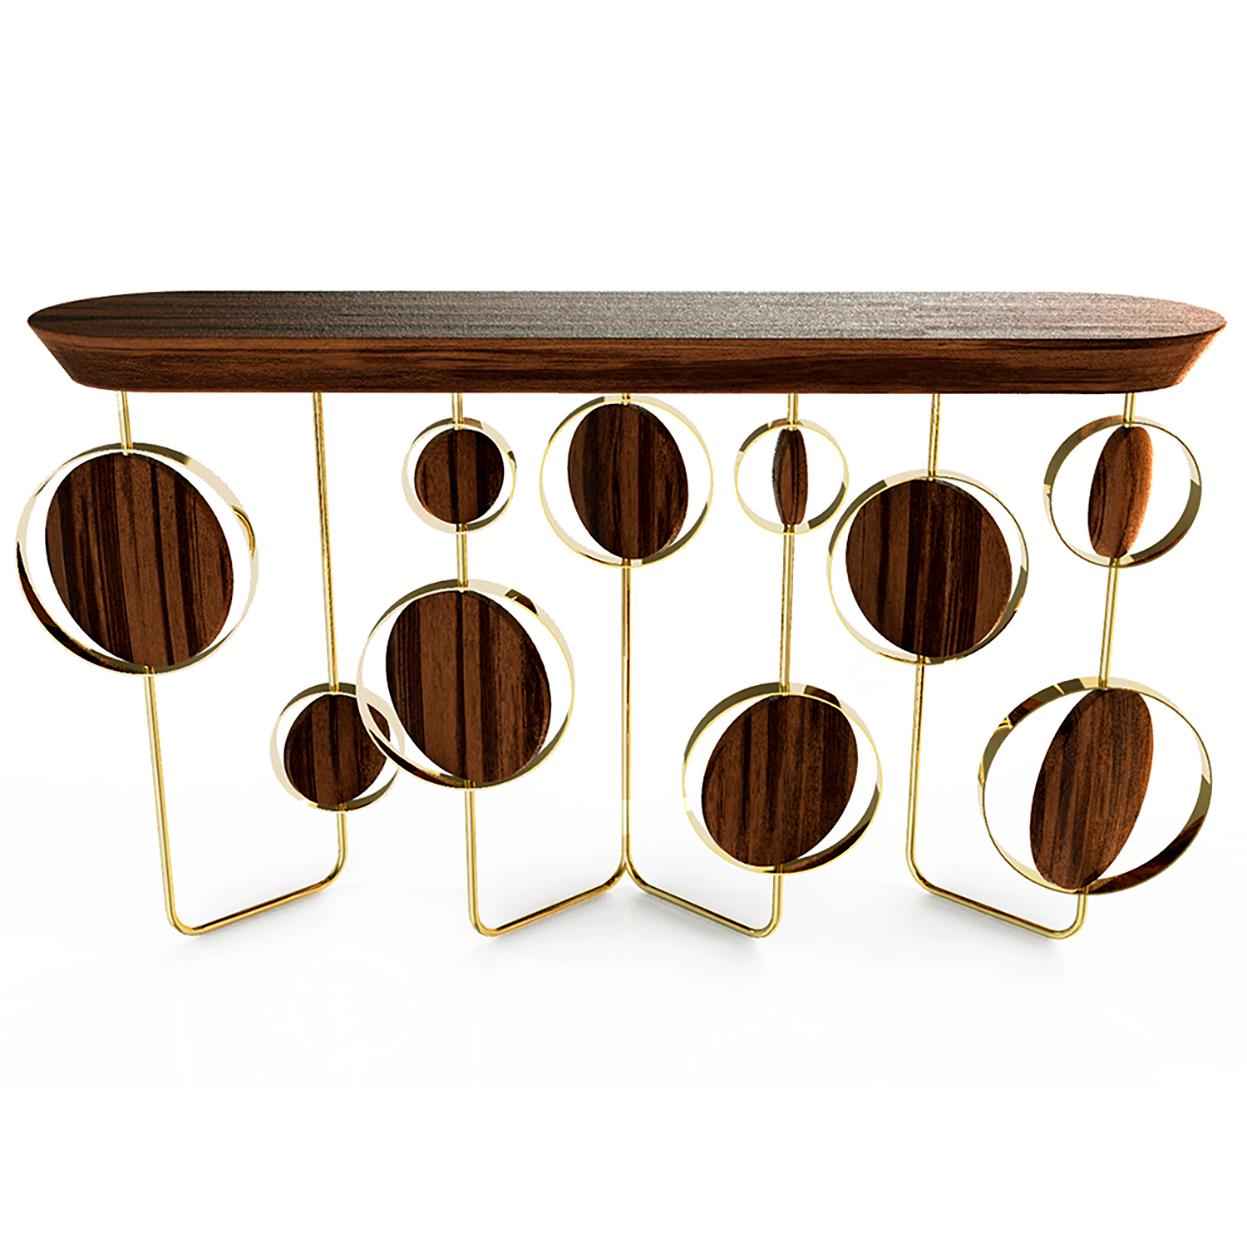 The Circle console is a unique piece of luxury furniture. It features a highly coveted combination of walnut and metal with brass or darkened nickel finish. 

This console has been expertly crafted by the artisans and results in an elegant piece